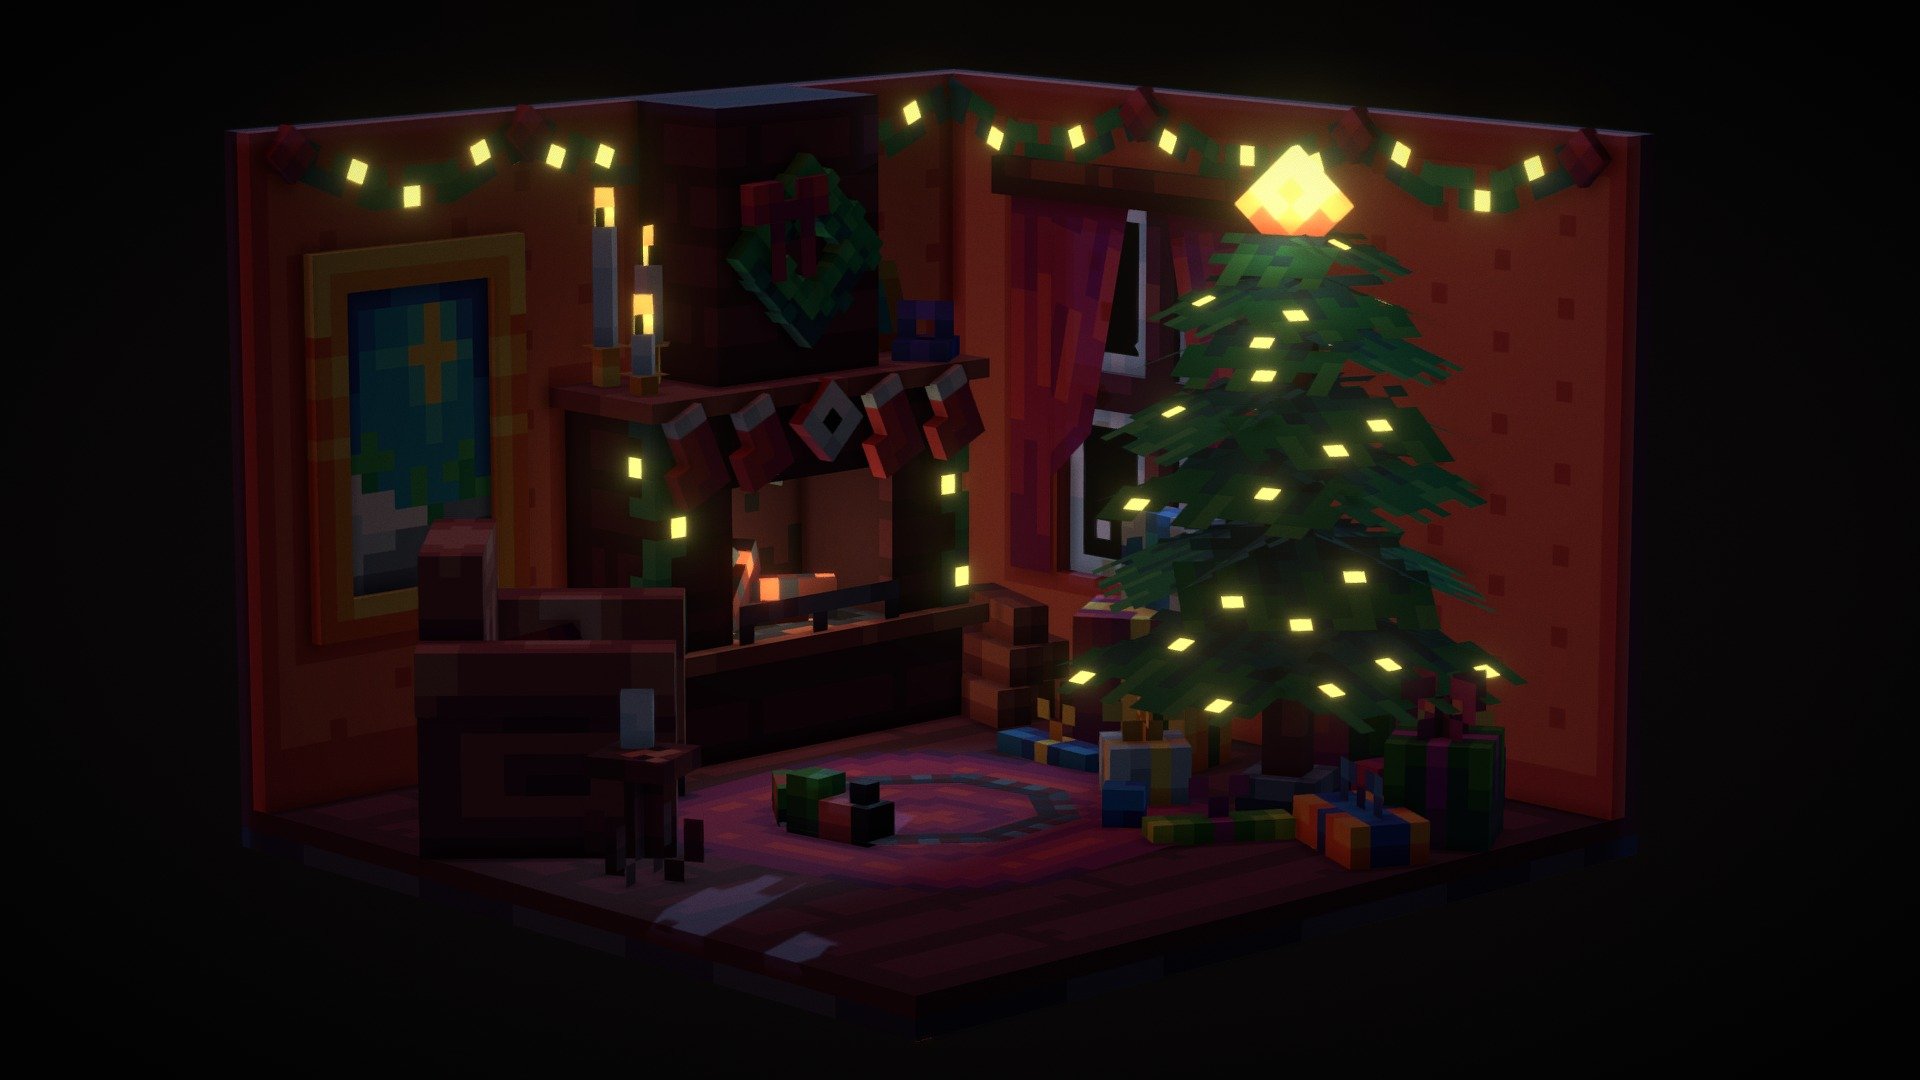 The classic and cliché Christmas fireplace scene we all know and love!
I can almost hear Frank Sinatra singing to this 3d model